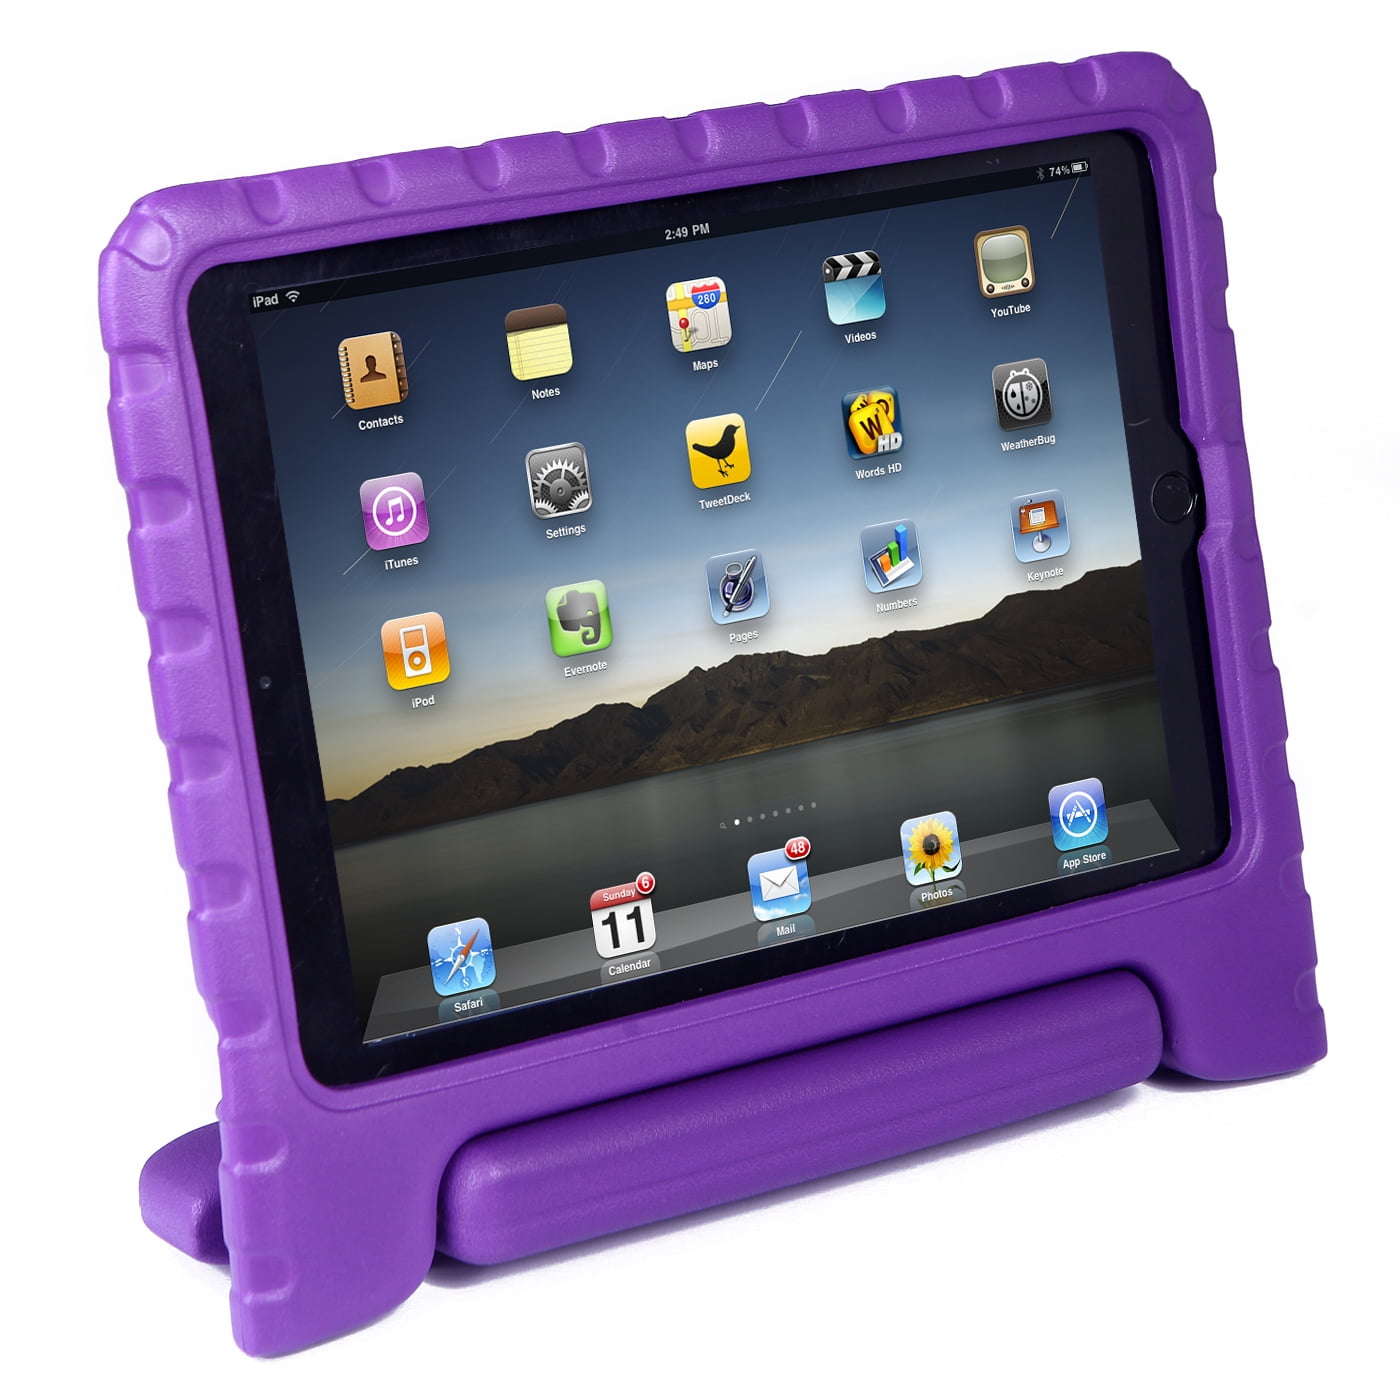 HDE iPad Air 2 Case for Kids Shockproof iPad Air 2 Cover Handle Stand for 6th Generation iPad